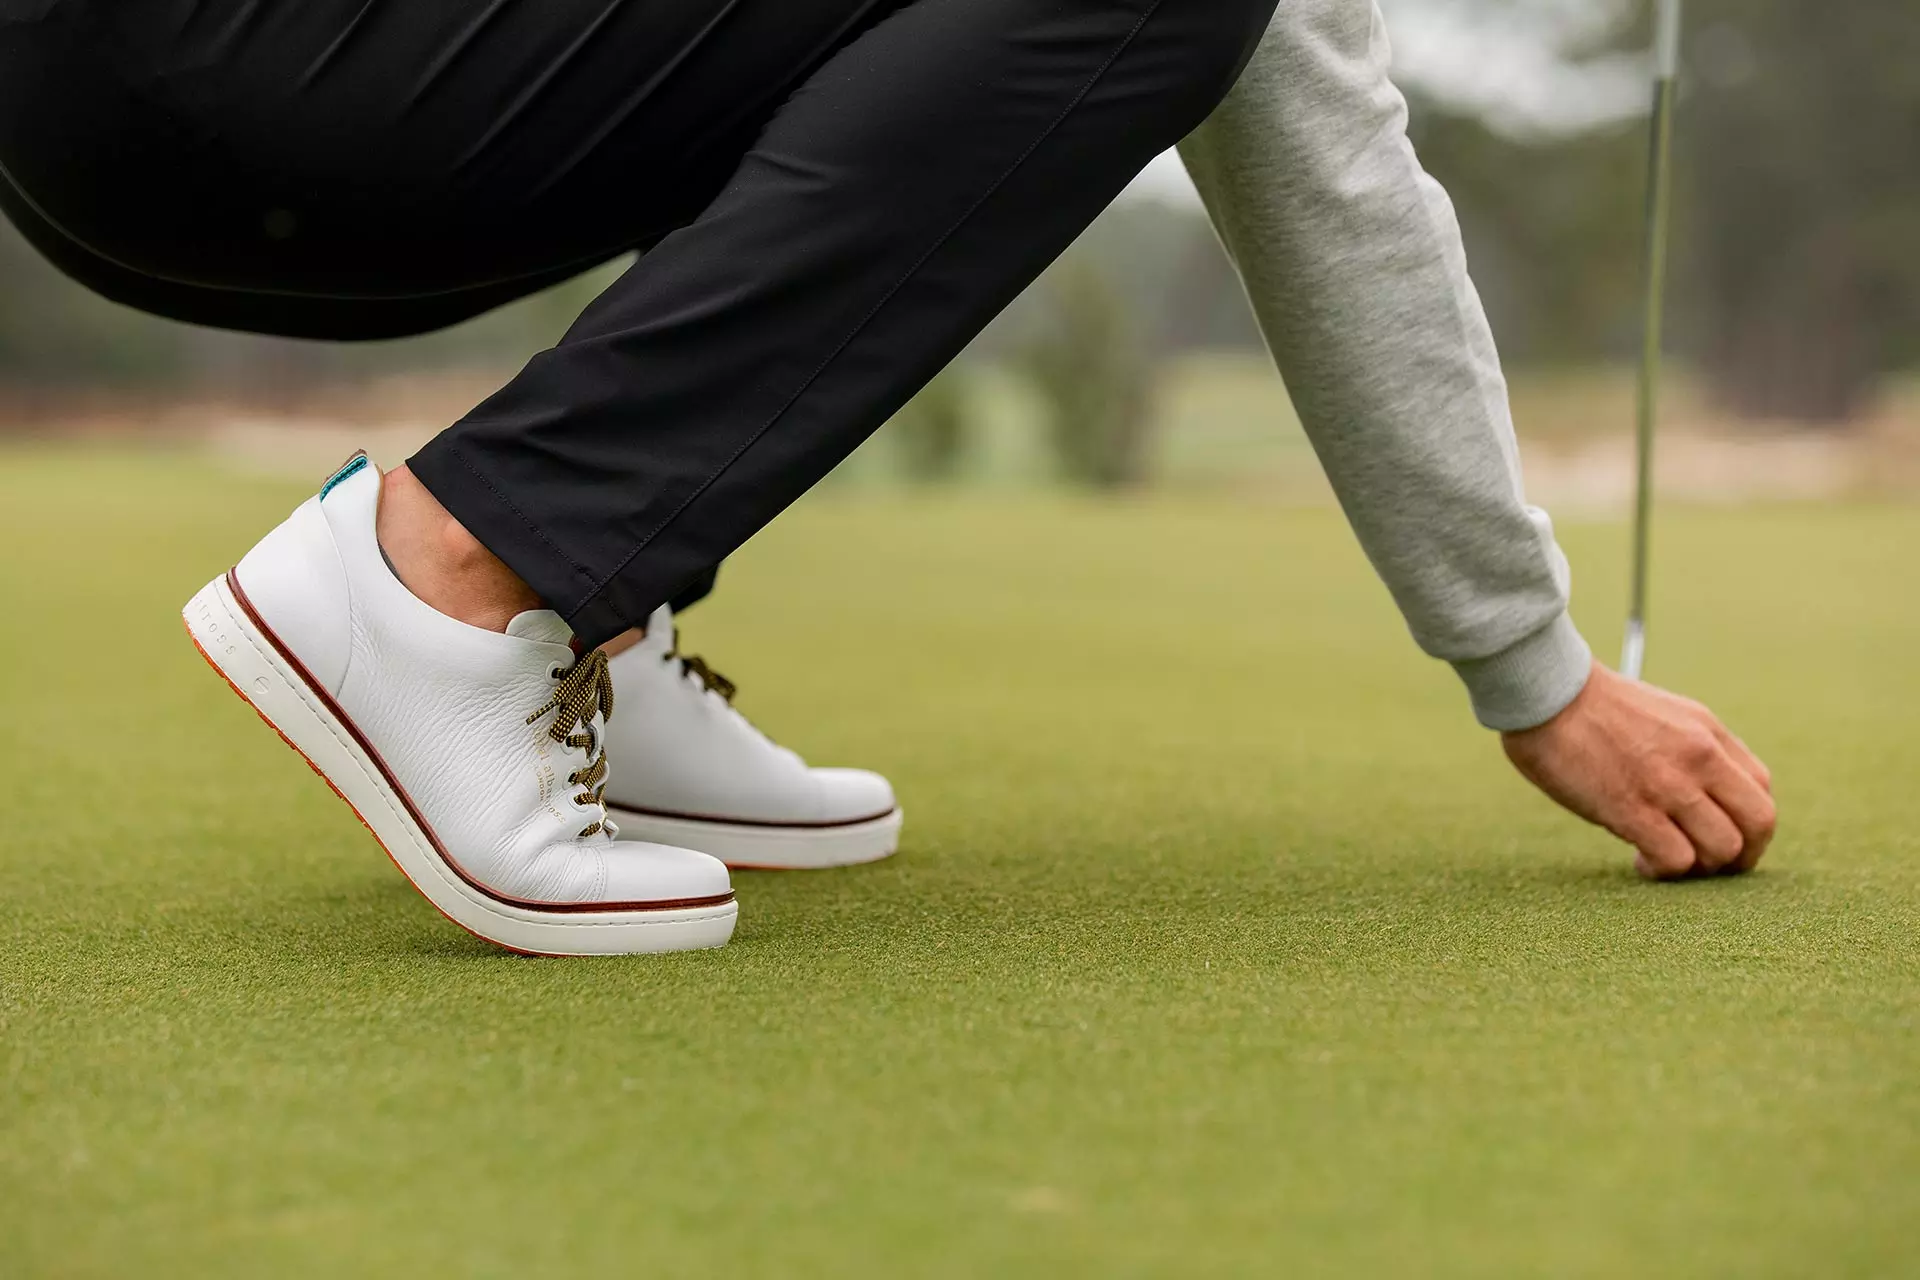 Various of shoes exist in the shoe market today that can allow players to still get ample traction and comfort without the typical golf shoe price. Here are our best non golf shoes for golf recommendations